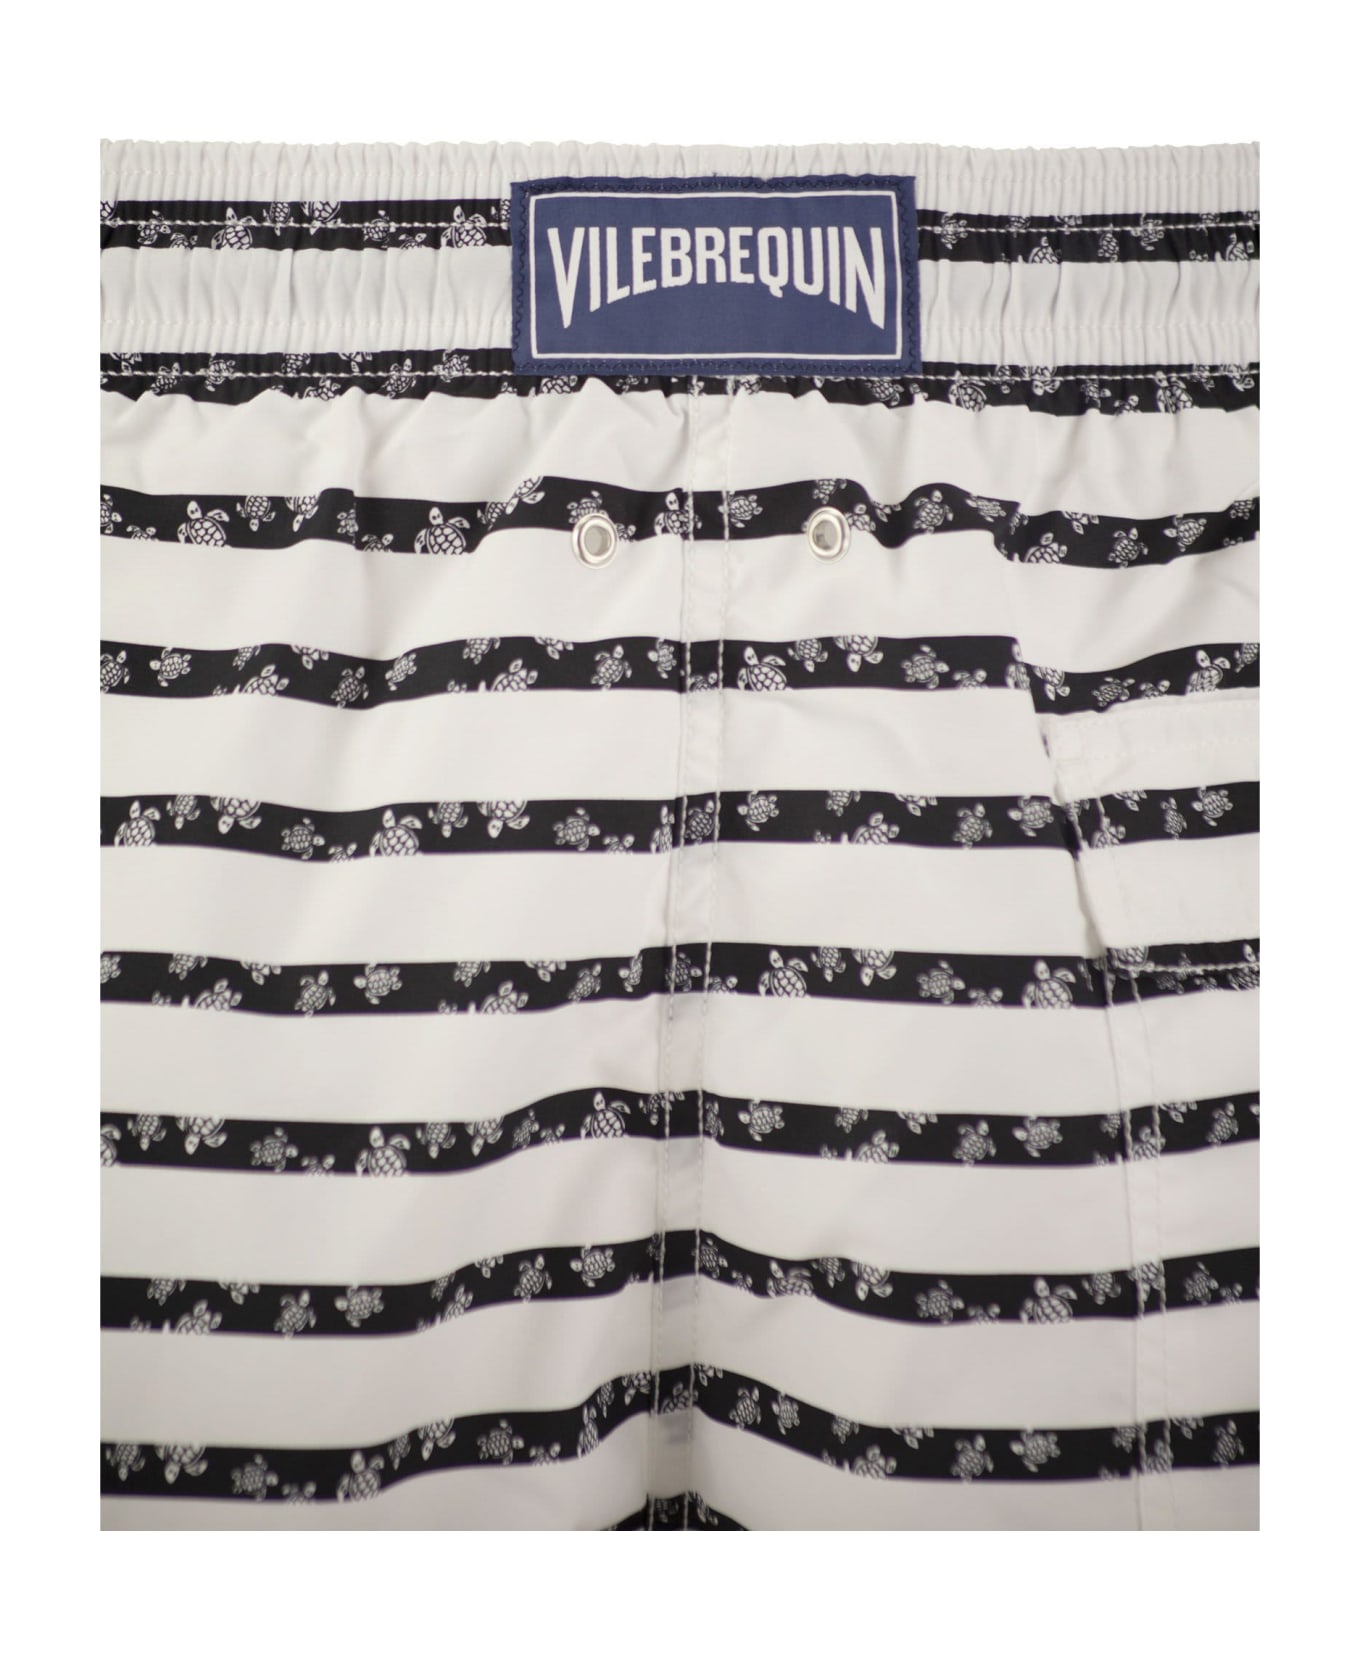 Vilebrequin Striped And Patterned Beach Shorts - White/blue 水着